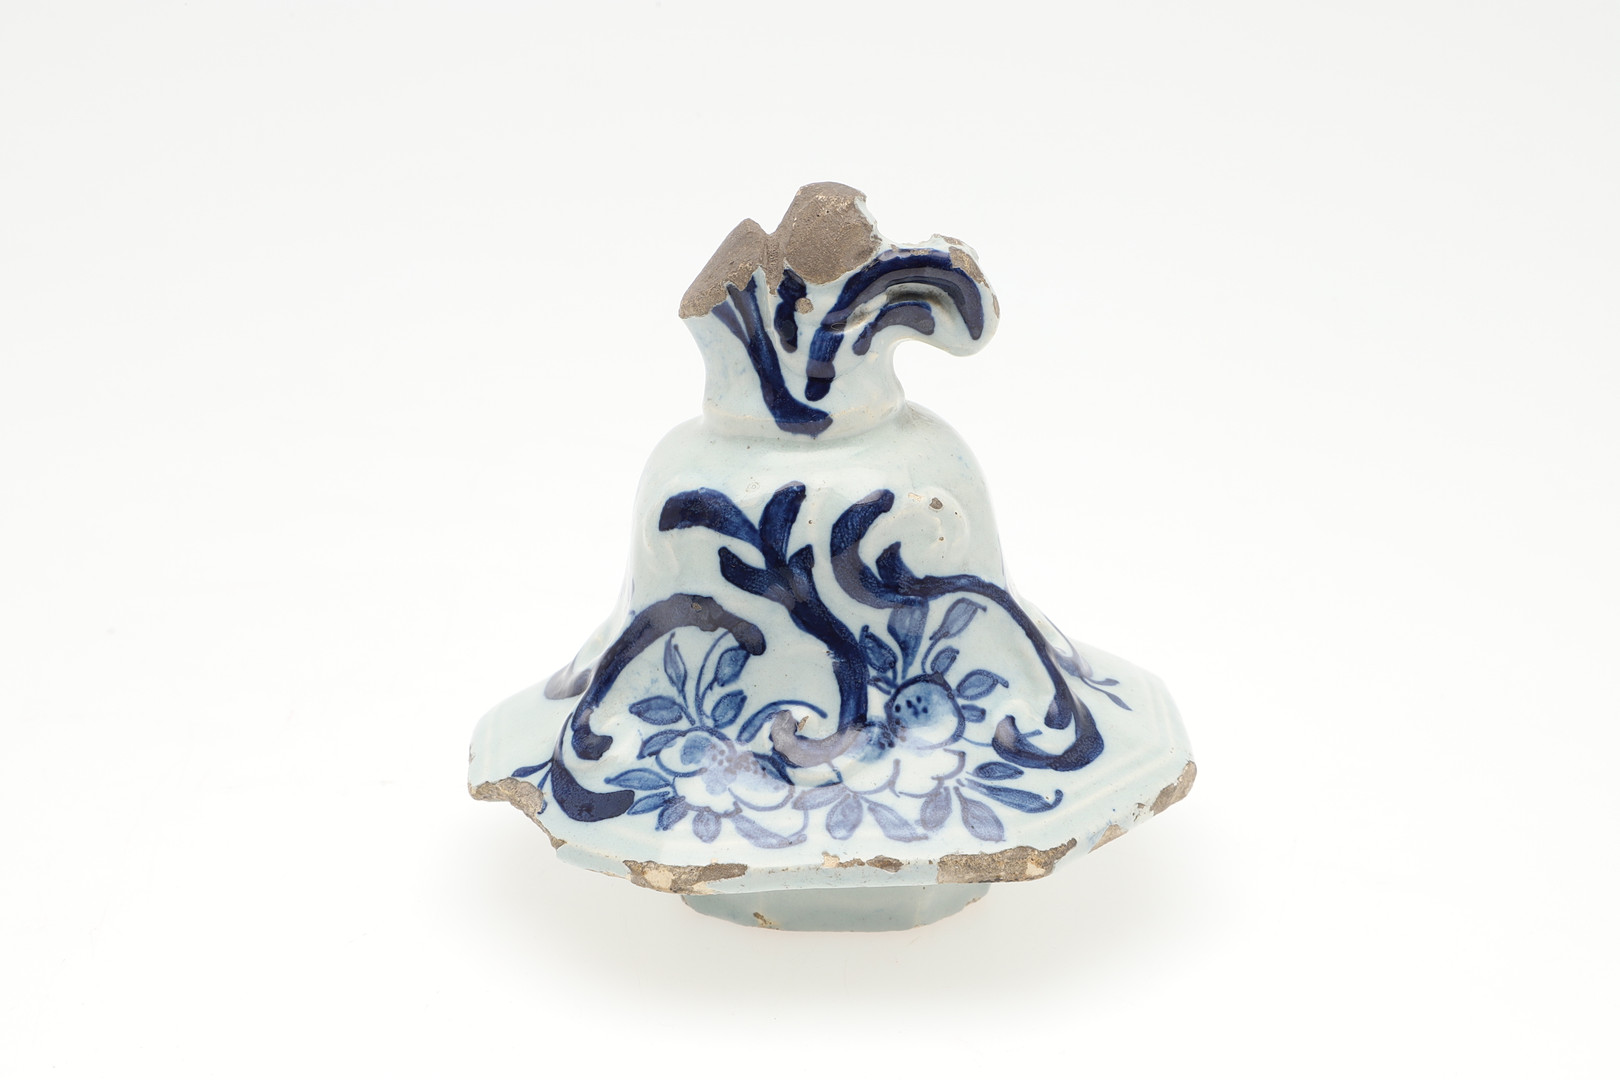 TWO PAIRS OF ANTIQUE DELFT VASES & ANOTHER VASE. - Image 34 of 60